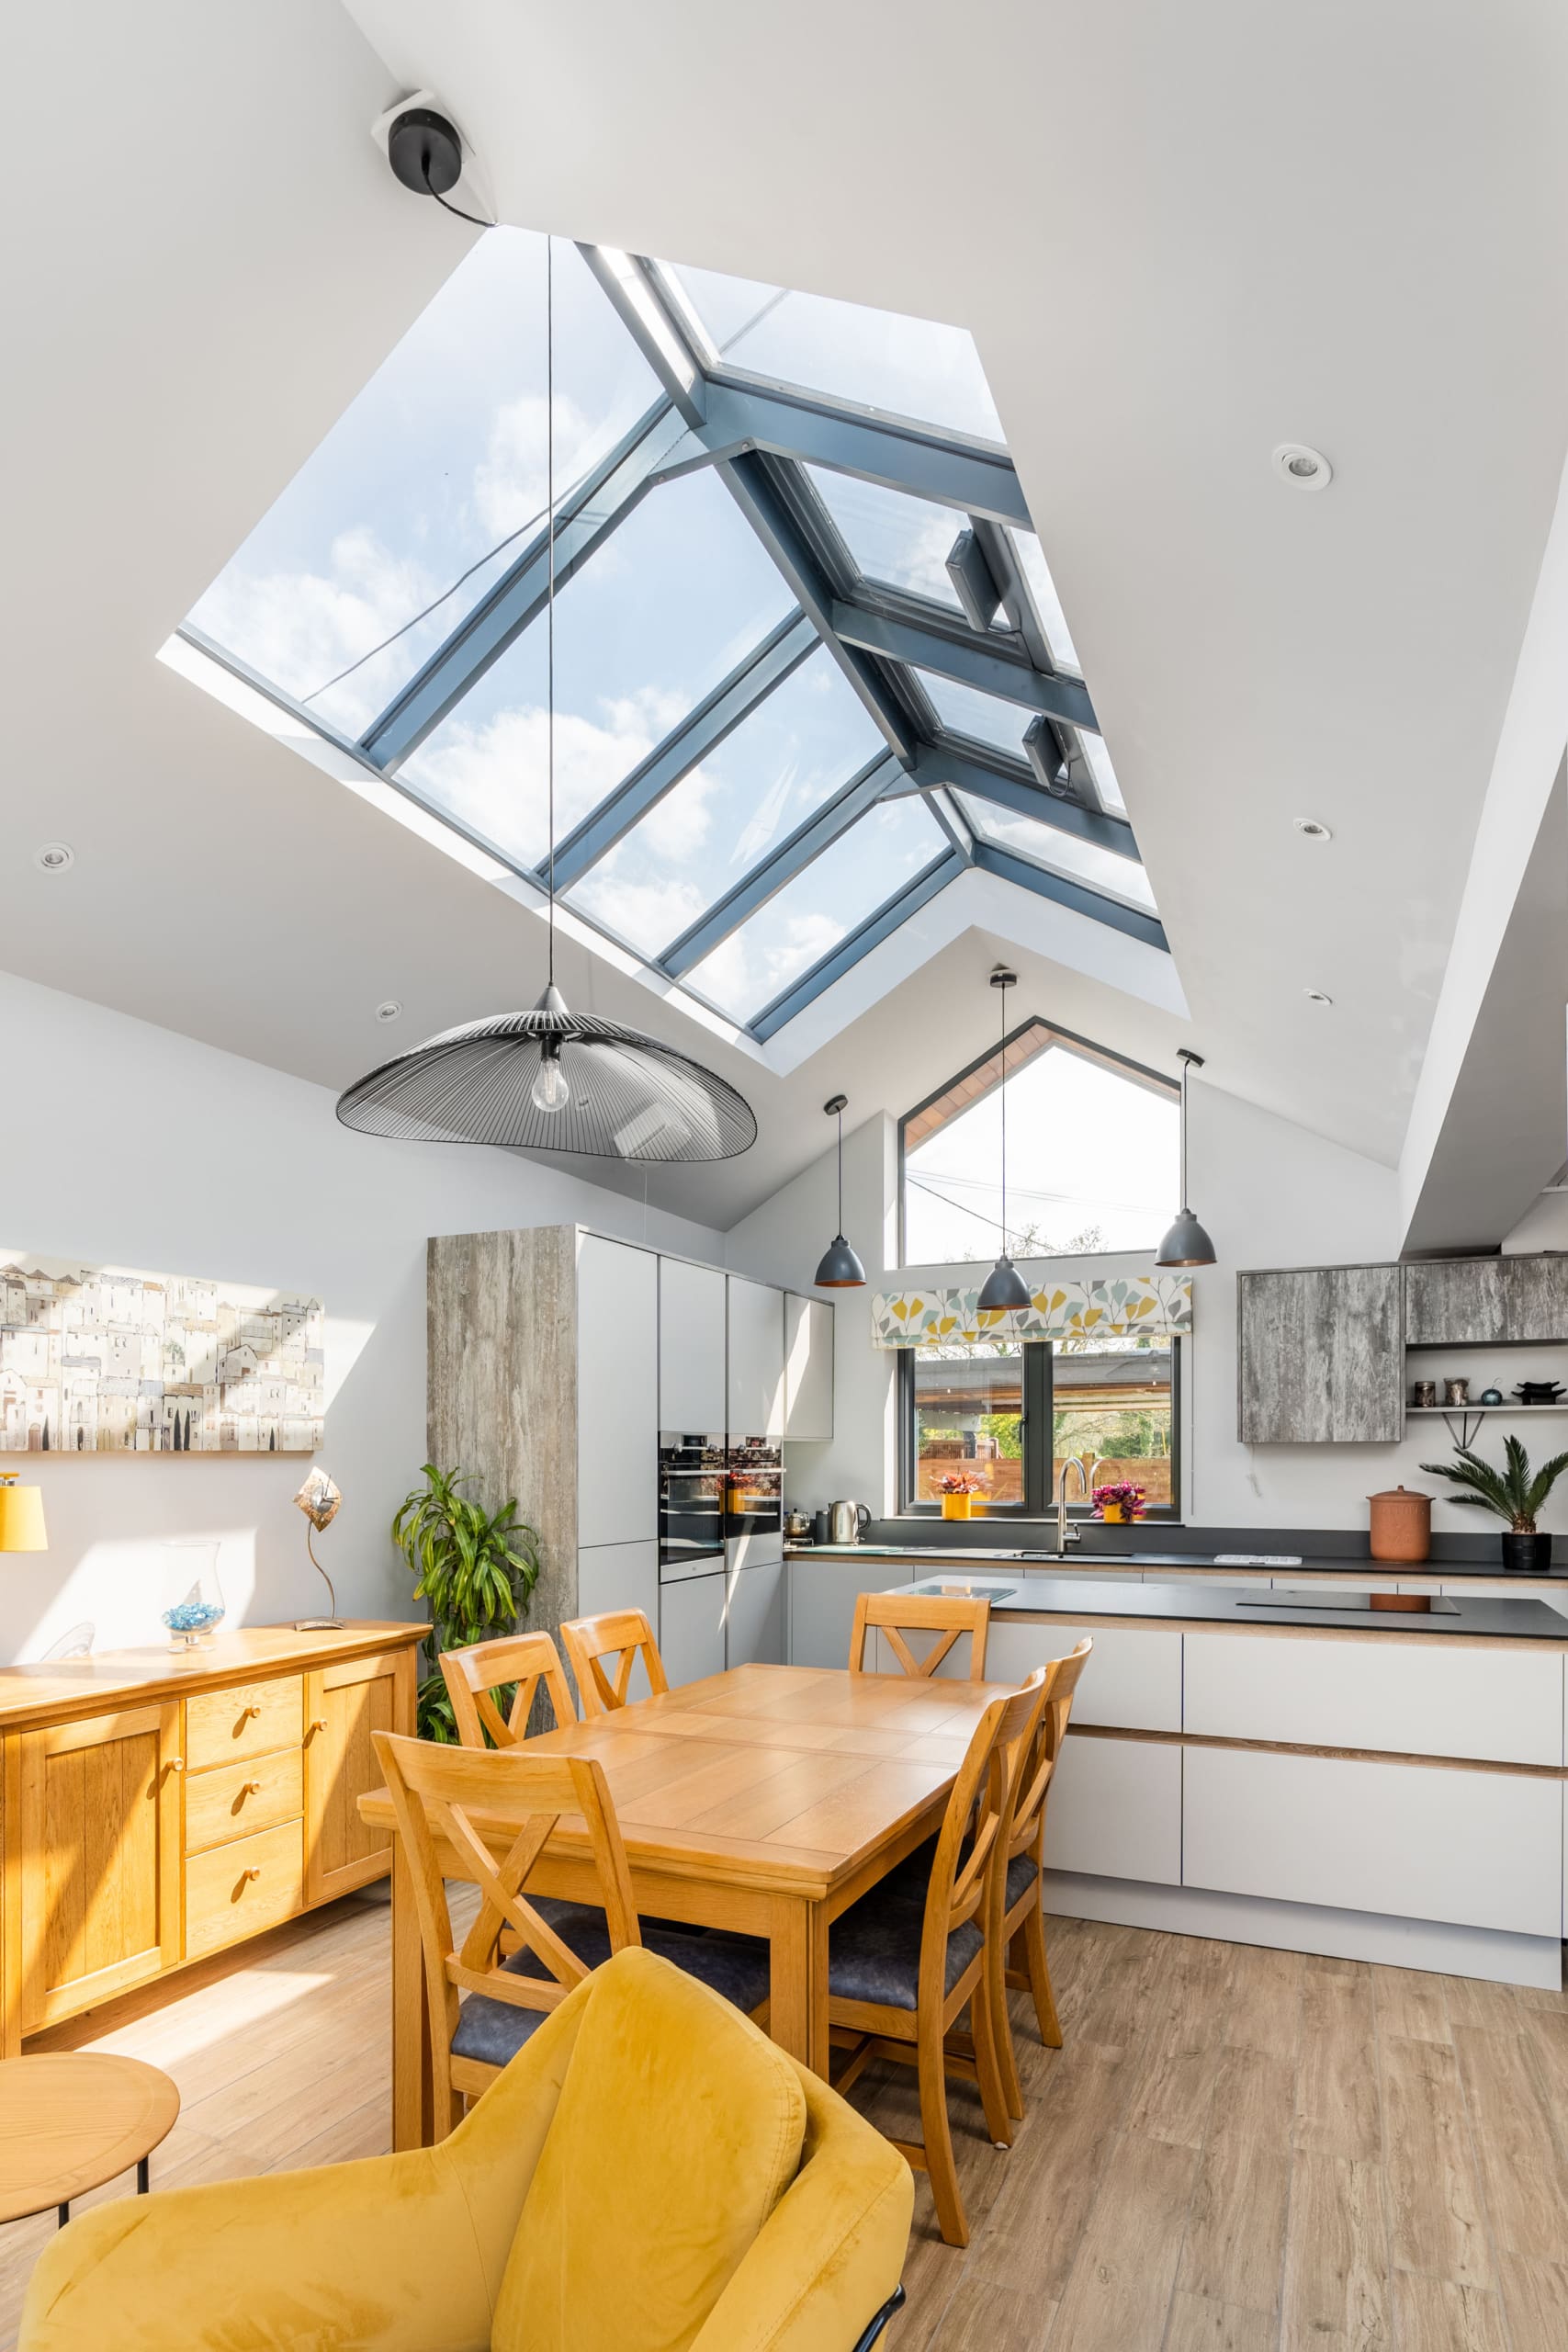 Kitchen extension with modern oak furniture and roof lantern.